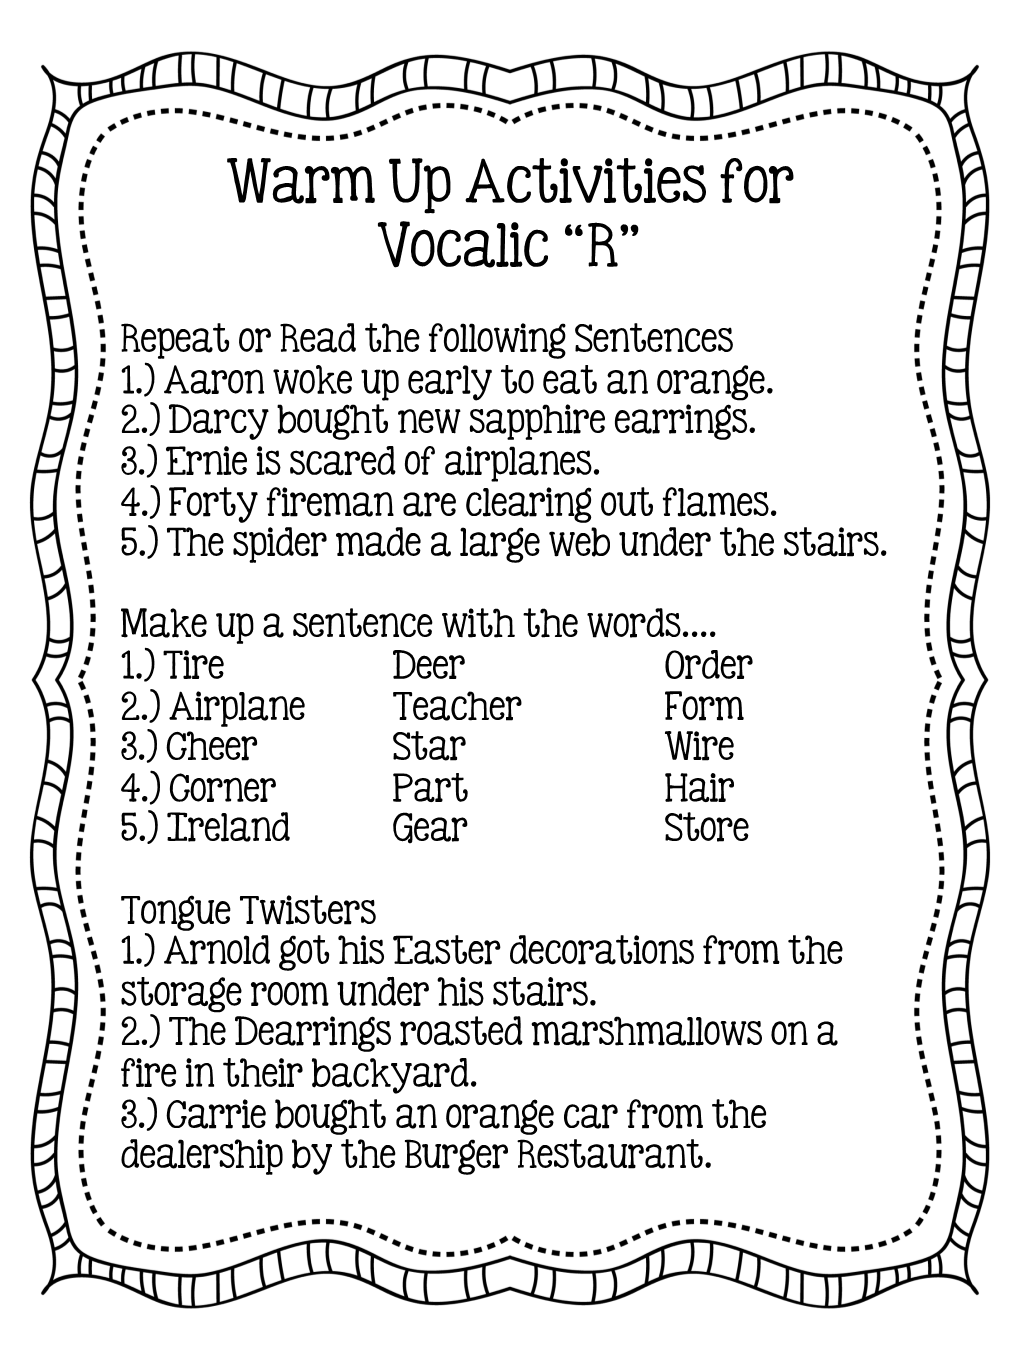 Warm up Activities for Vocalic “R”